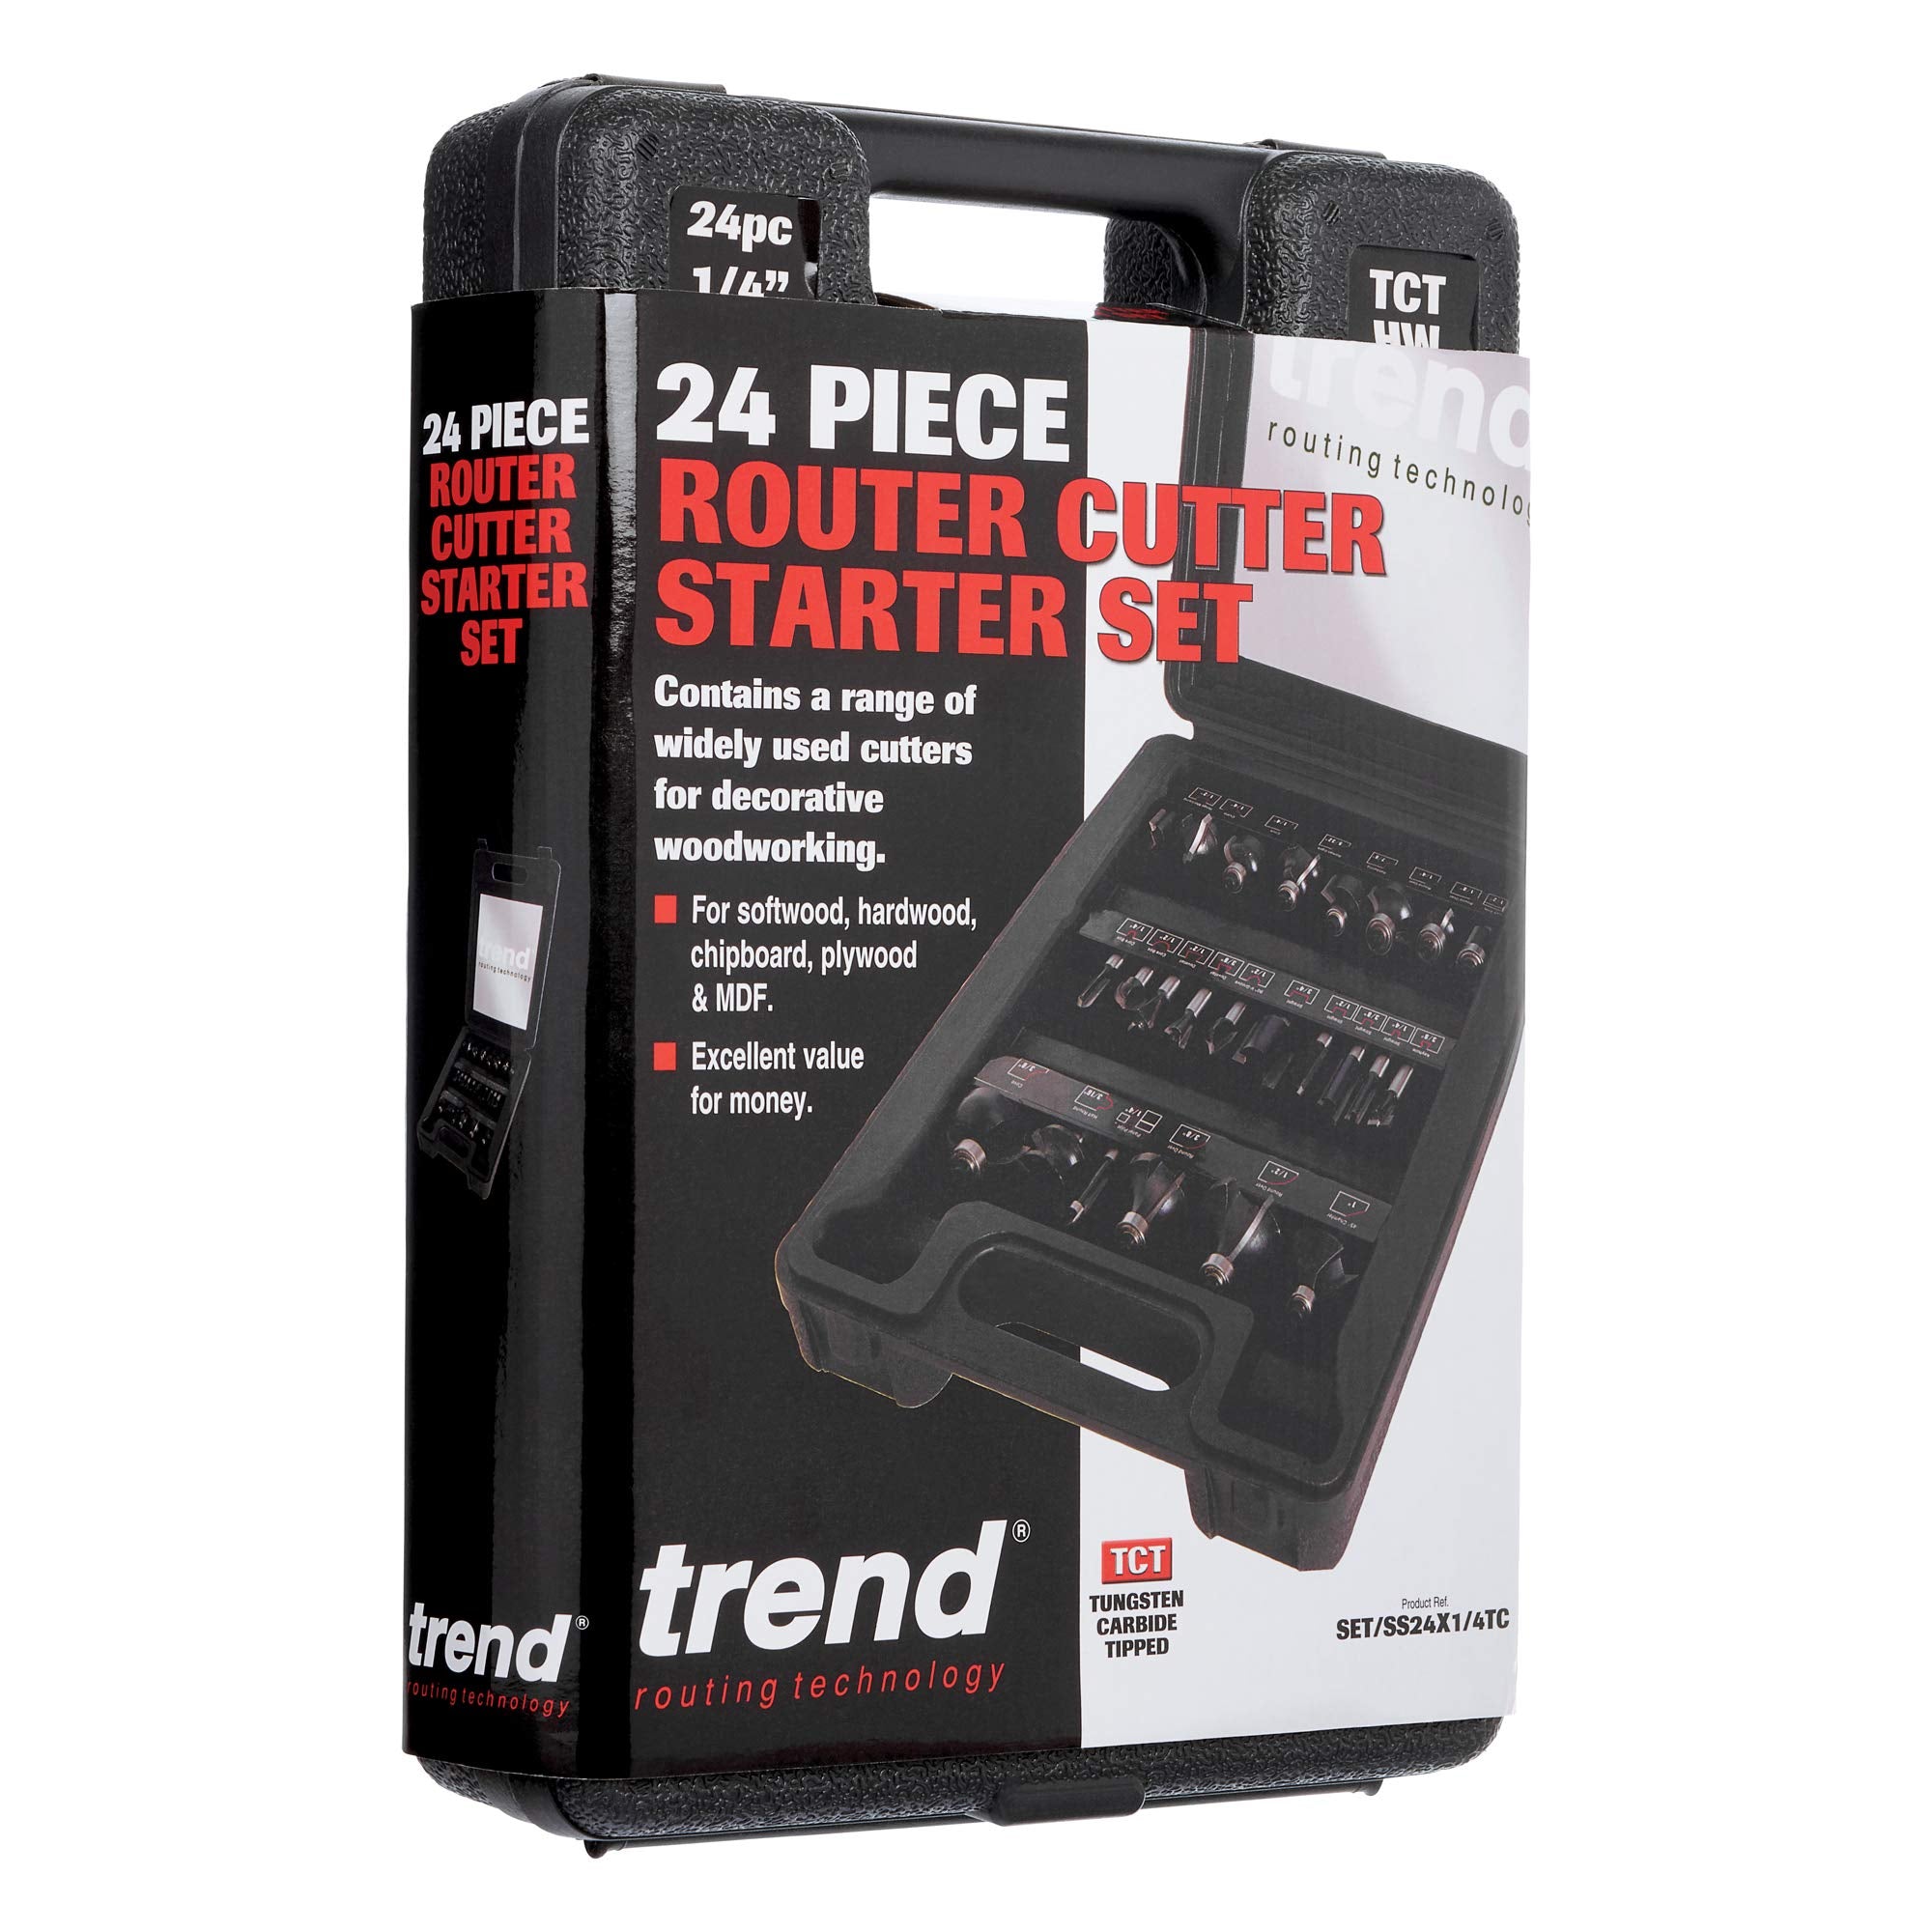 Trend 24 Piece Router Bit Starter Set, 1/4 Inch Shank, Tungsten Carbide Tipped, Storage Case Included, SET/SS24X1/4TC